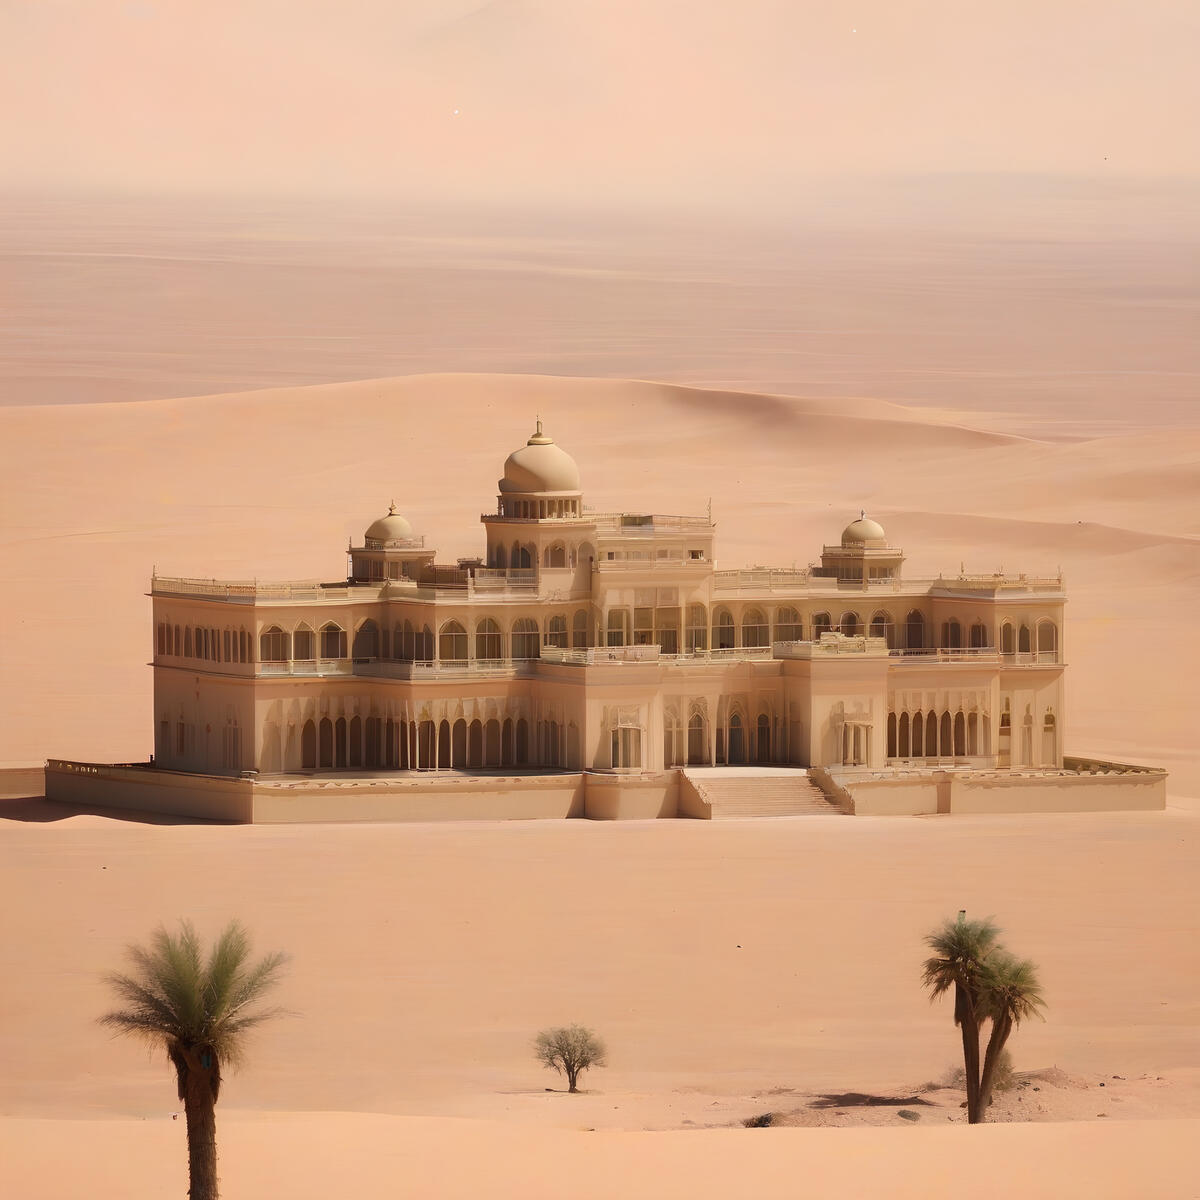 A palace in the desert